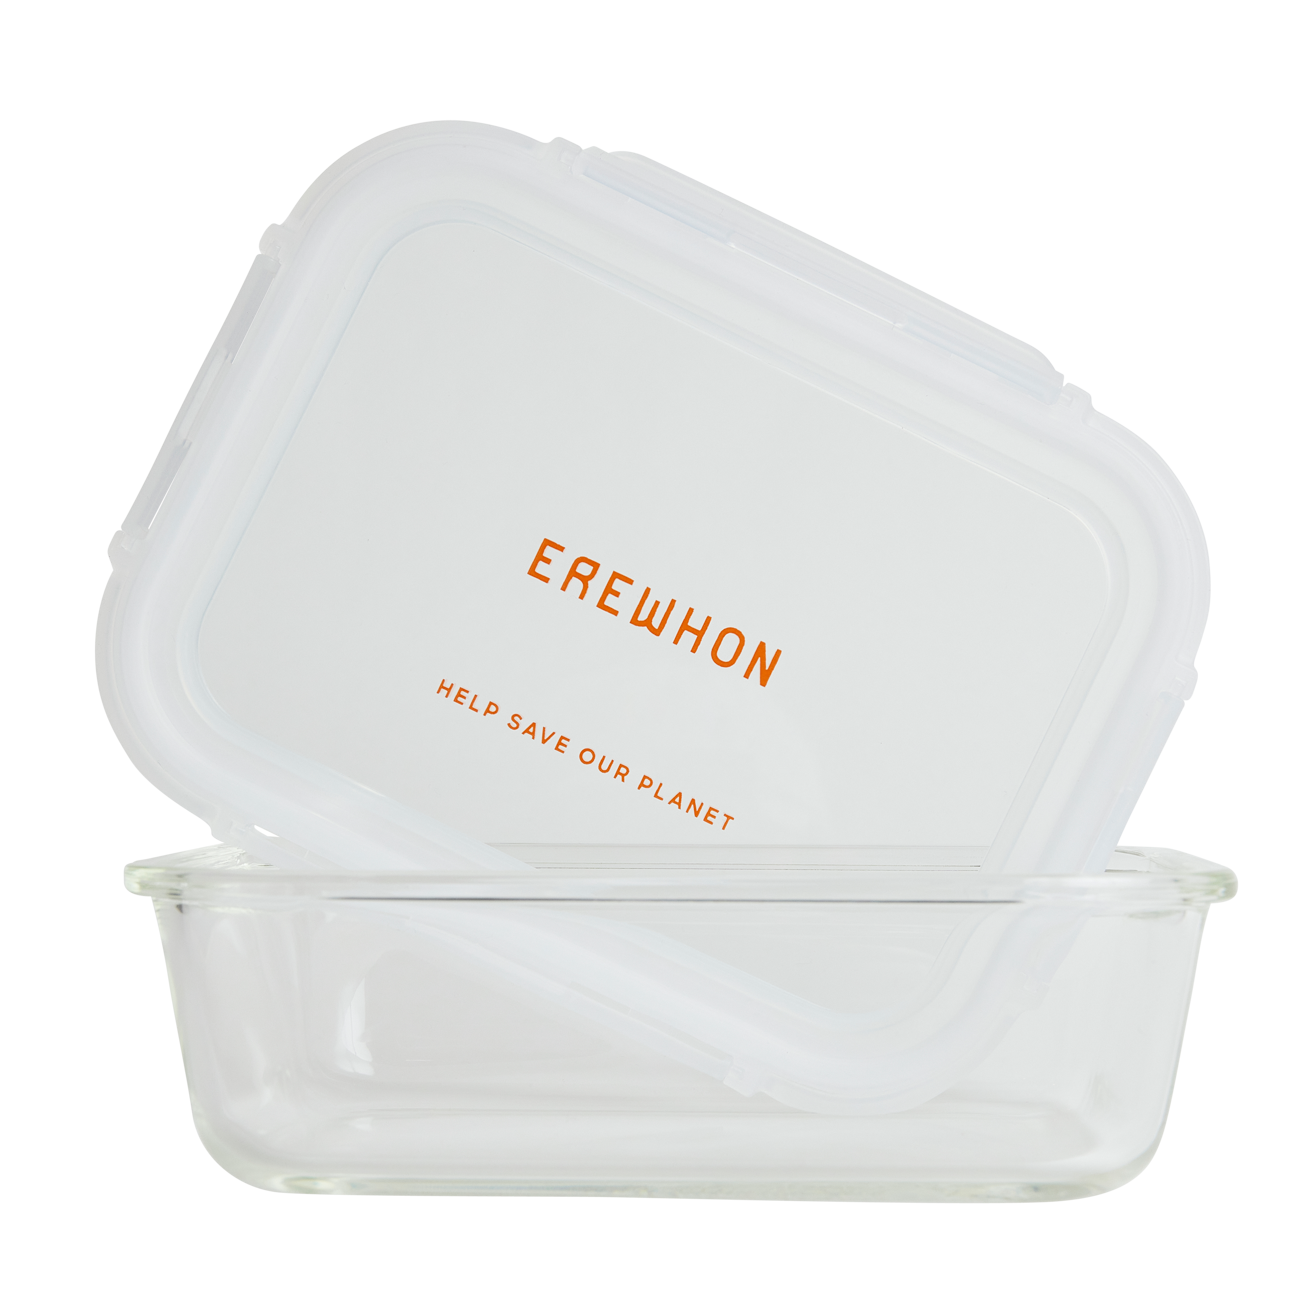 Erewhon Large Glass Food Storage Containers. Help Save the Planet